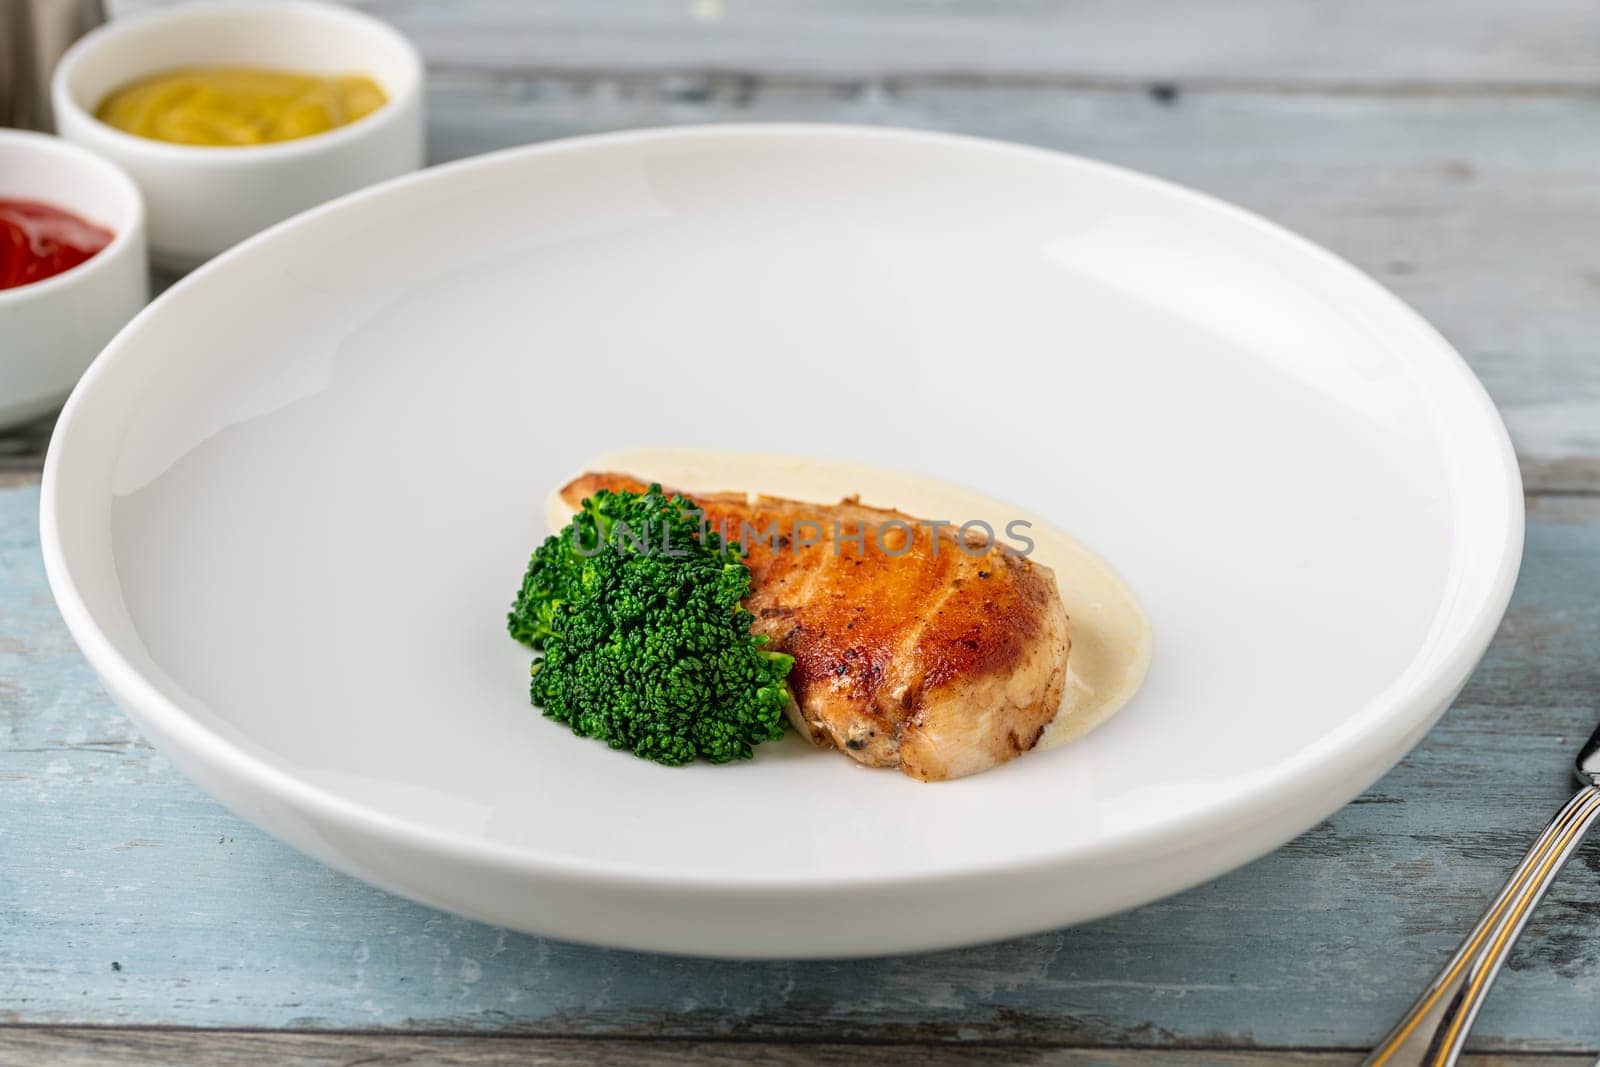 Grilled chicken breast with broccoli and sauce on a white porcelain plate by Sonat